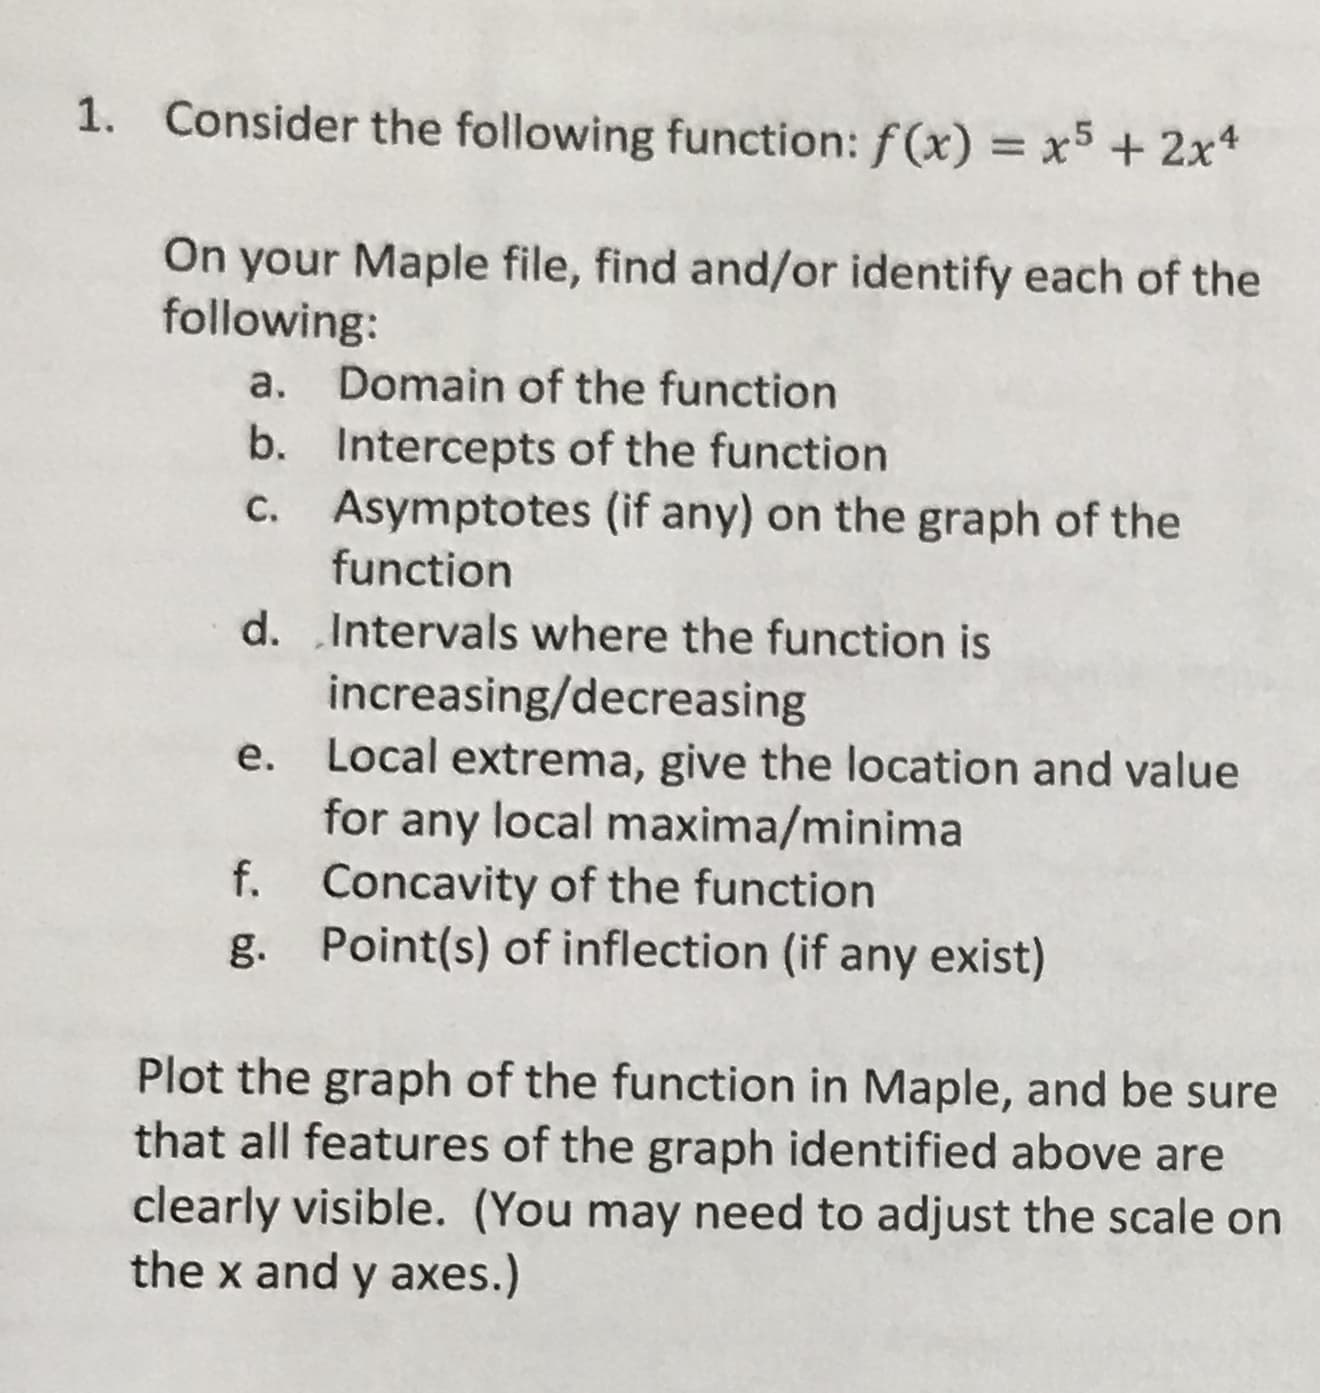 1.
Consider the following function: f(x)
x5 2x4
On your Maple file, find and/or identify each of the
following:
Domain of the function
а.
b.
Intercepts of the function
Asymptotes (if any) on the graph of the
C.
function
d. Intervals where the function is
increasing/decreasing
е.
Local extrema, give the location and value
for
any local maxima/minima
Concavity of the function
Point(s) of inflection (if any exist)
f.
g.
Plot the graph of the function in Maple, and be sure
that all features of the graph identified above are
clearly visible. (You may need to adjust the scale on
the x and y axes.)
